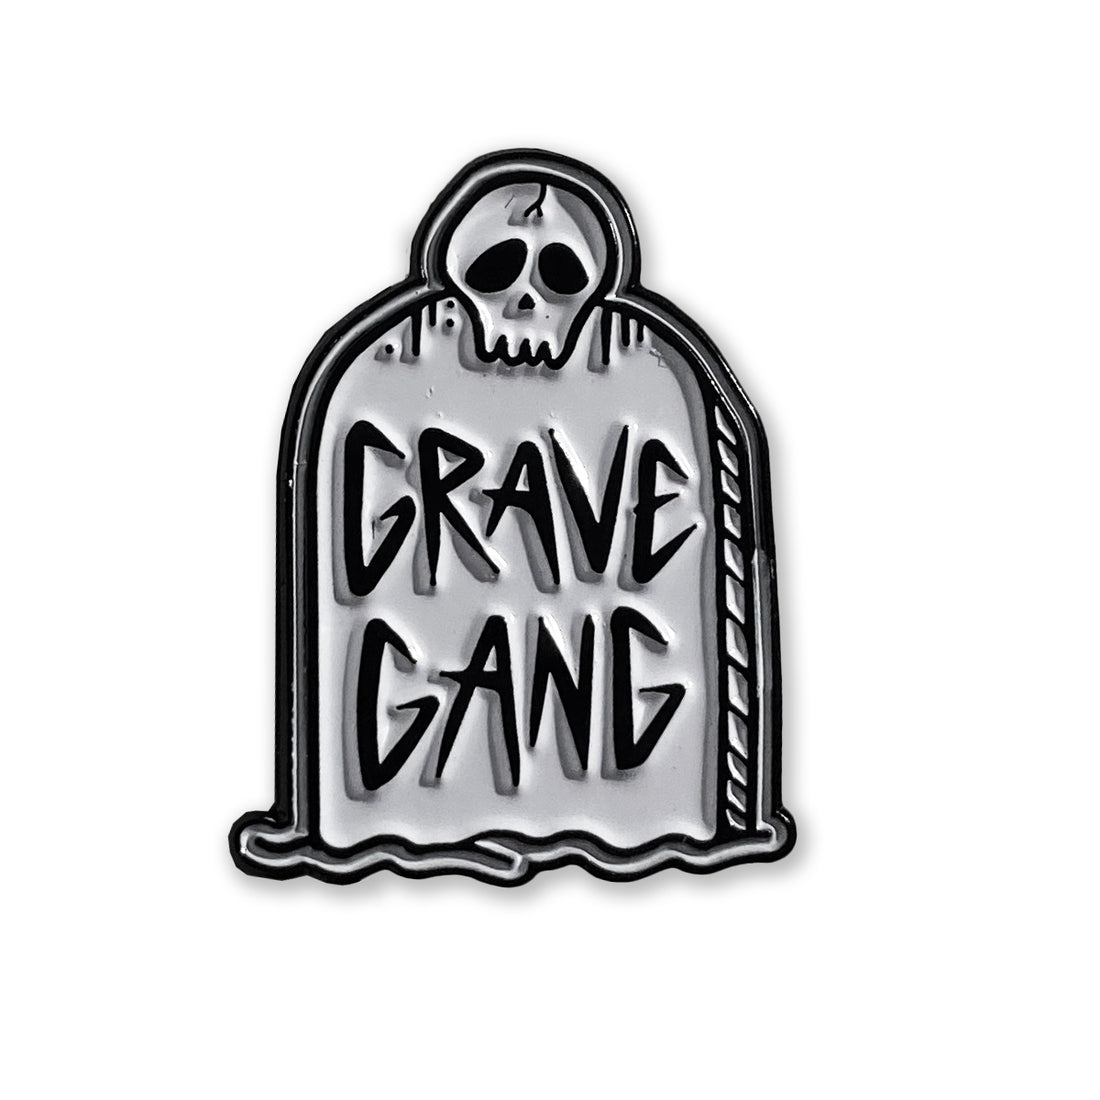 Grave Gang - Tombstone - Lapel Pin